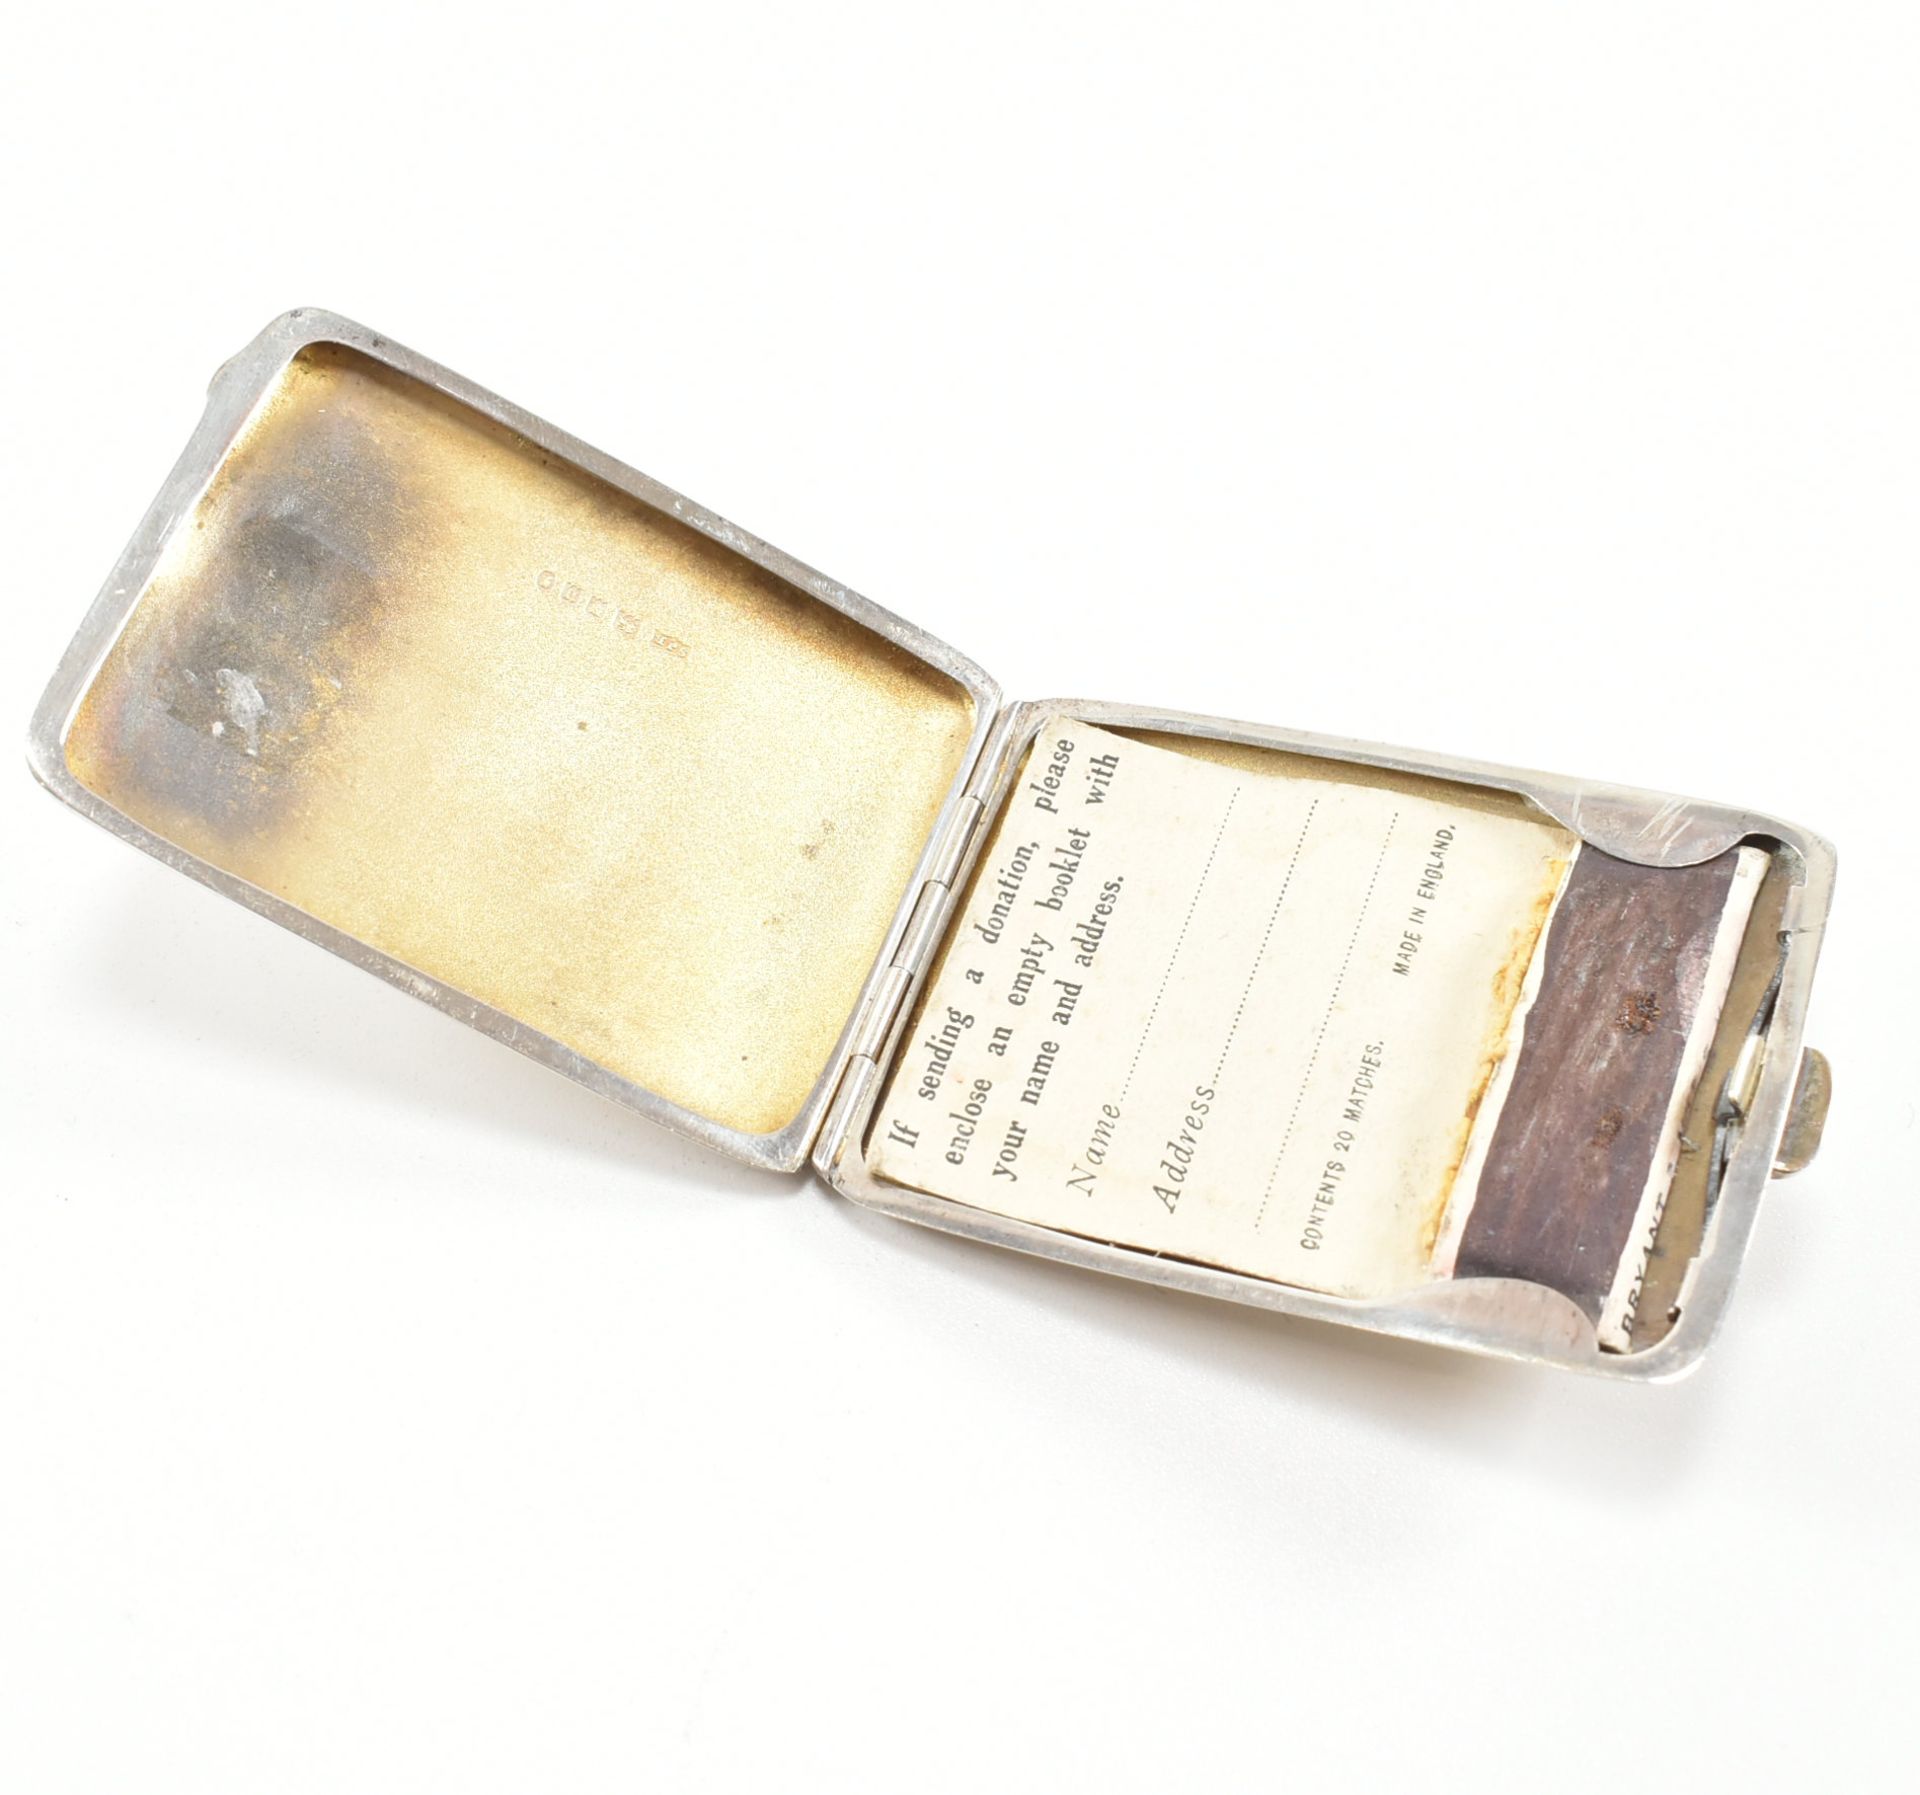 COLLECTION OF EARLY 20TH CENTURY ART DECO HALLMARKED SILVER CIGARETTE & VESTA CASE - Image 7 of 14